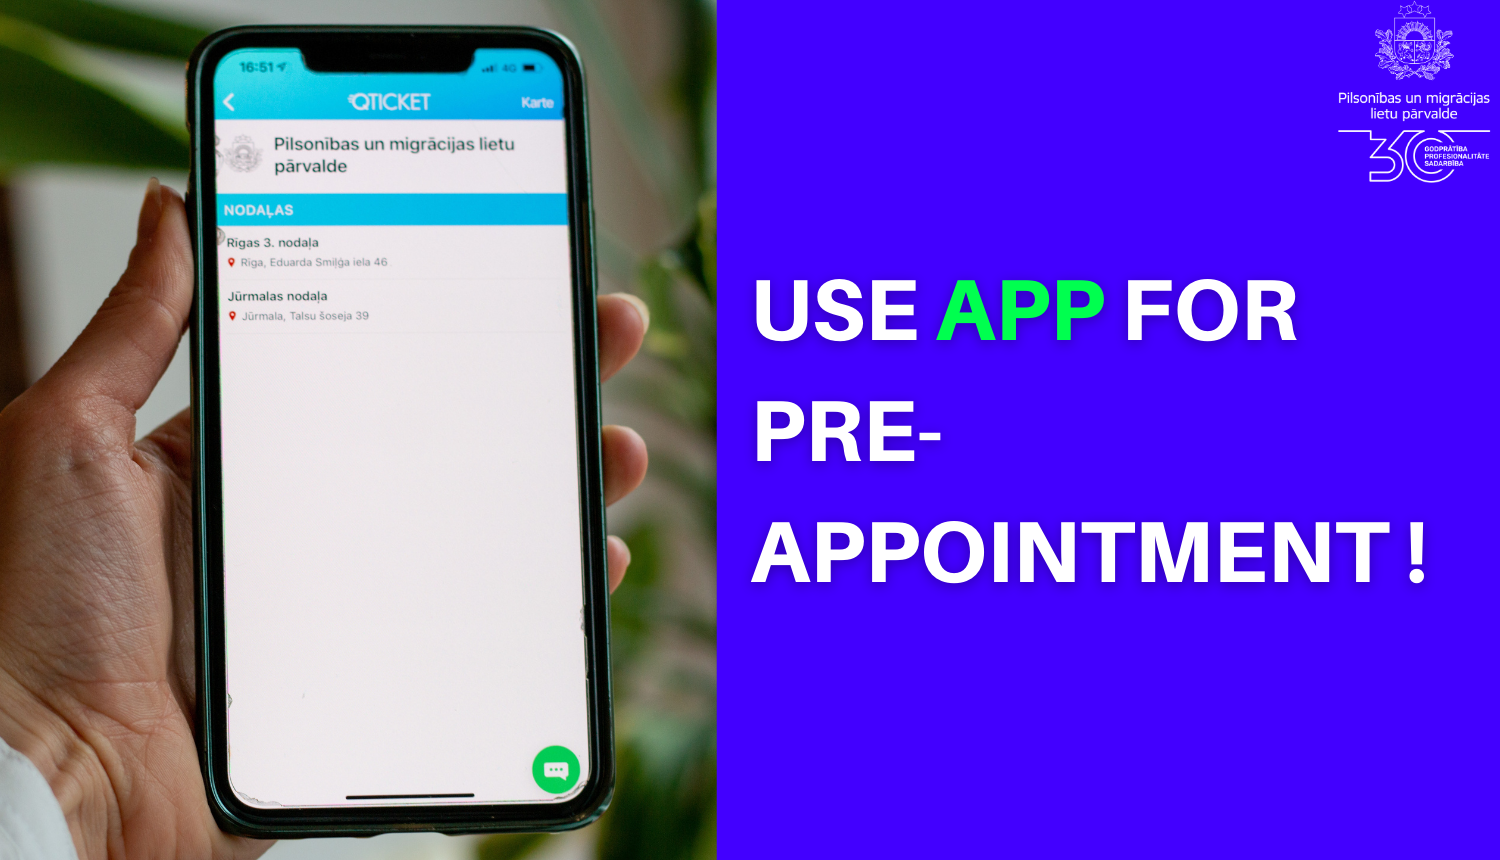 Use app for pre-appointment